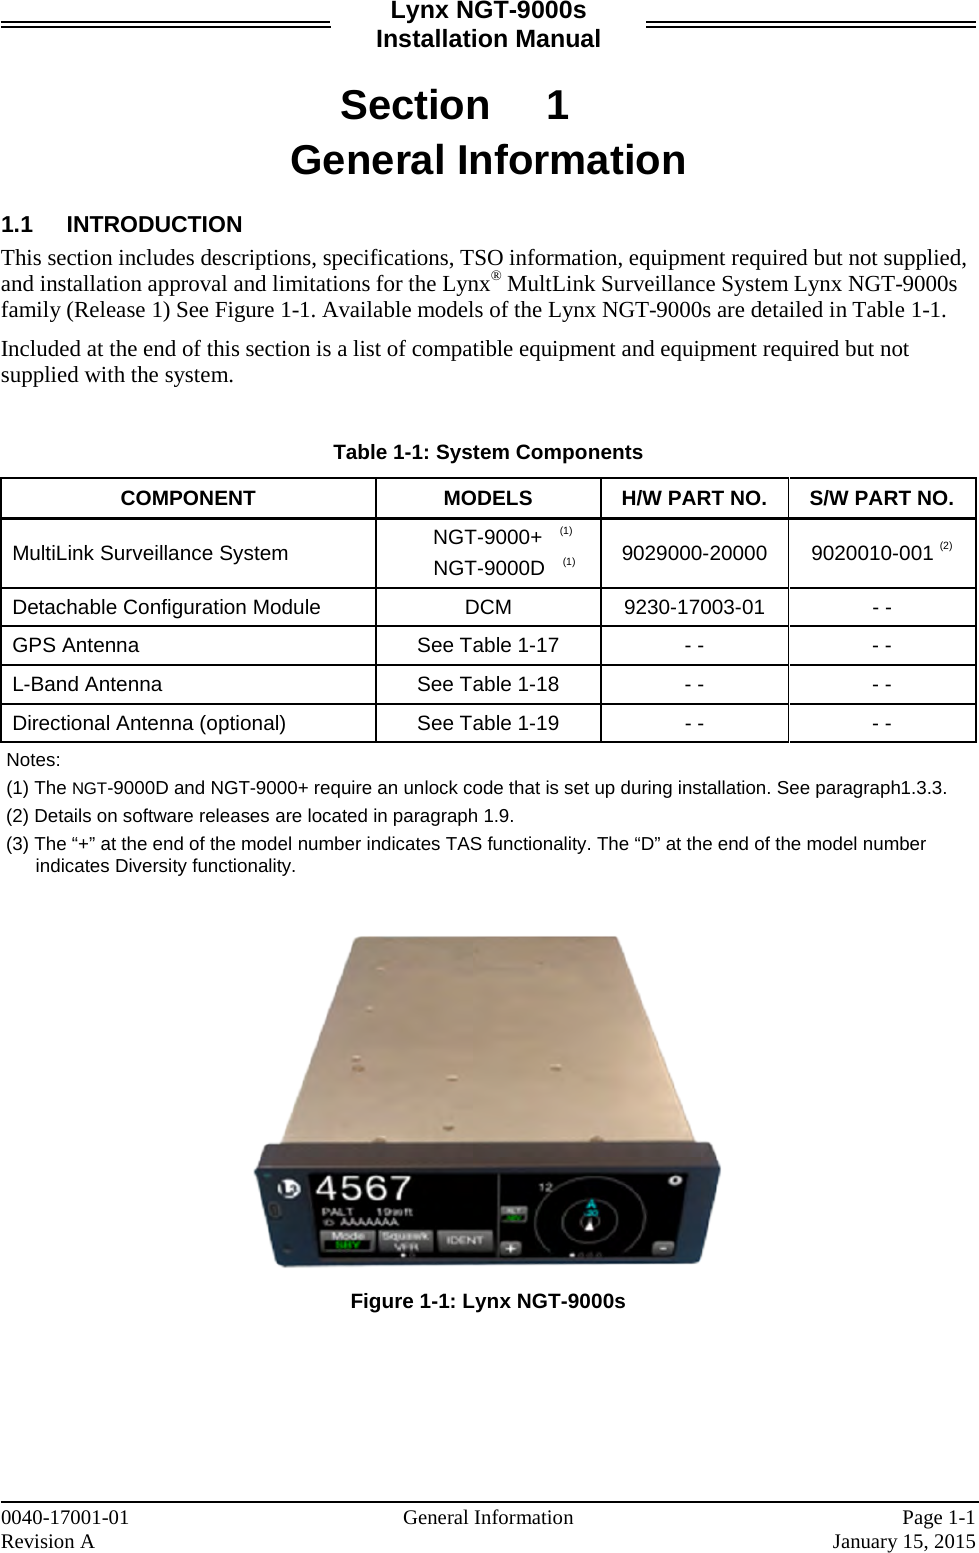 Lynx NGT-9000s Installation Manual  Section 1 General Information  1.1 INTRODUCTION This section includes descriptions, specifications, TSO information, equipment required but not supplied, and installation approval and limitations for the Lynx® MultLink Surveillance System Lynx NGT-9000s family (Release 1) See Figure 1-1. Available models of the Lynx NGT-9000s are detailed in Table 1-1.  Included at the end of this section is a list of compatible equipment and equipment required but not supplied with the system.   Table 1-1: System Components COMPONENT MODELS H/W PART NO. S/W PART NO. MultiLink Surveillance System NGT-9000+   (1) NGT-9000D   (1) 9029000-20000 9020010-001 (2) Detachable Configuration Module DCM 9230-17003-01  - - GPS Antenna See Table 1-17  - -  - - L-Band Antenna See Table 1-18  - -  - - Directional Antenna (optional) See Table 1-19  - -  - -  Notes:   (1) The NGT-9000D and NGT-9000+ require an unlock code that is set up during installation. See paragraph1.3.3.  (2) Details on software releases are located in paragraph 1.9.  (3) The “+” at the end of the model number indicates TAS functionality. The “D” at the end of the model number indicates Diversity functionality.     Figure 1-1: Lynx NGT-9000s     0040-17001-01    General Information Page 1-1 Revision A     January 15, 2015 